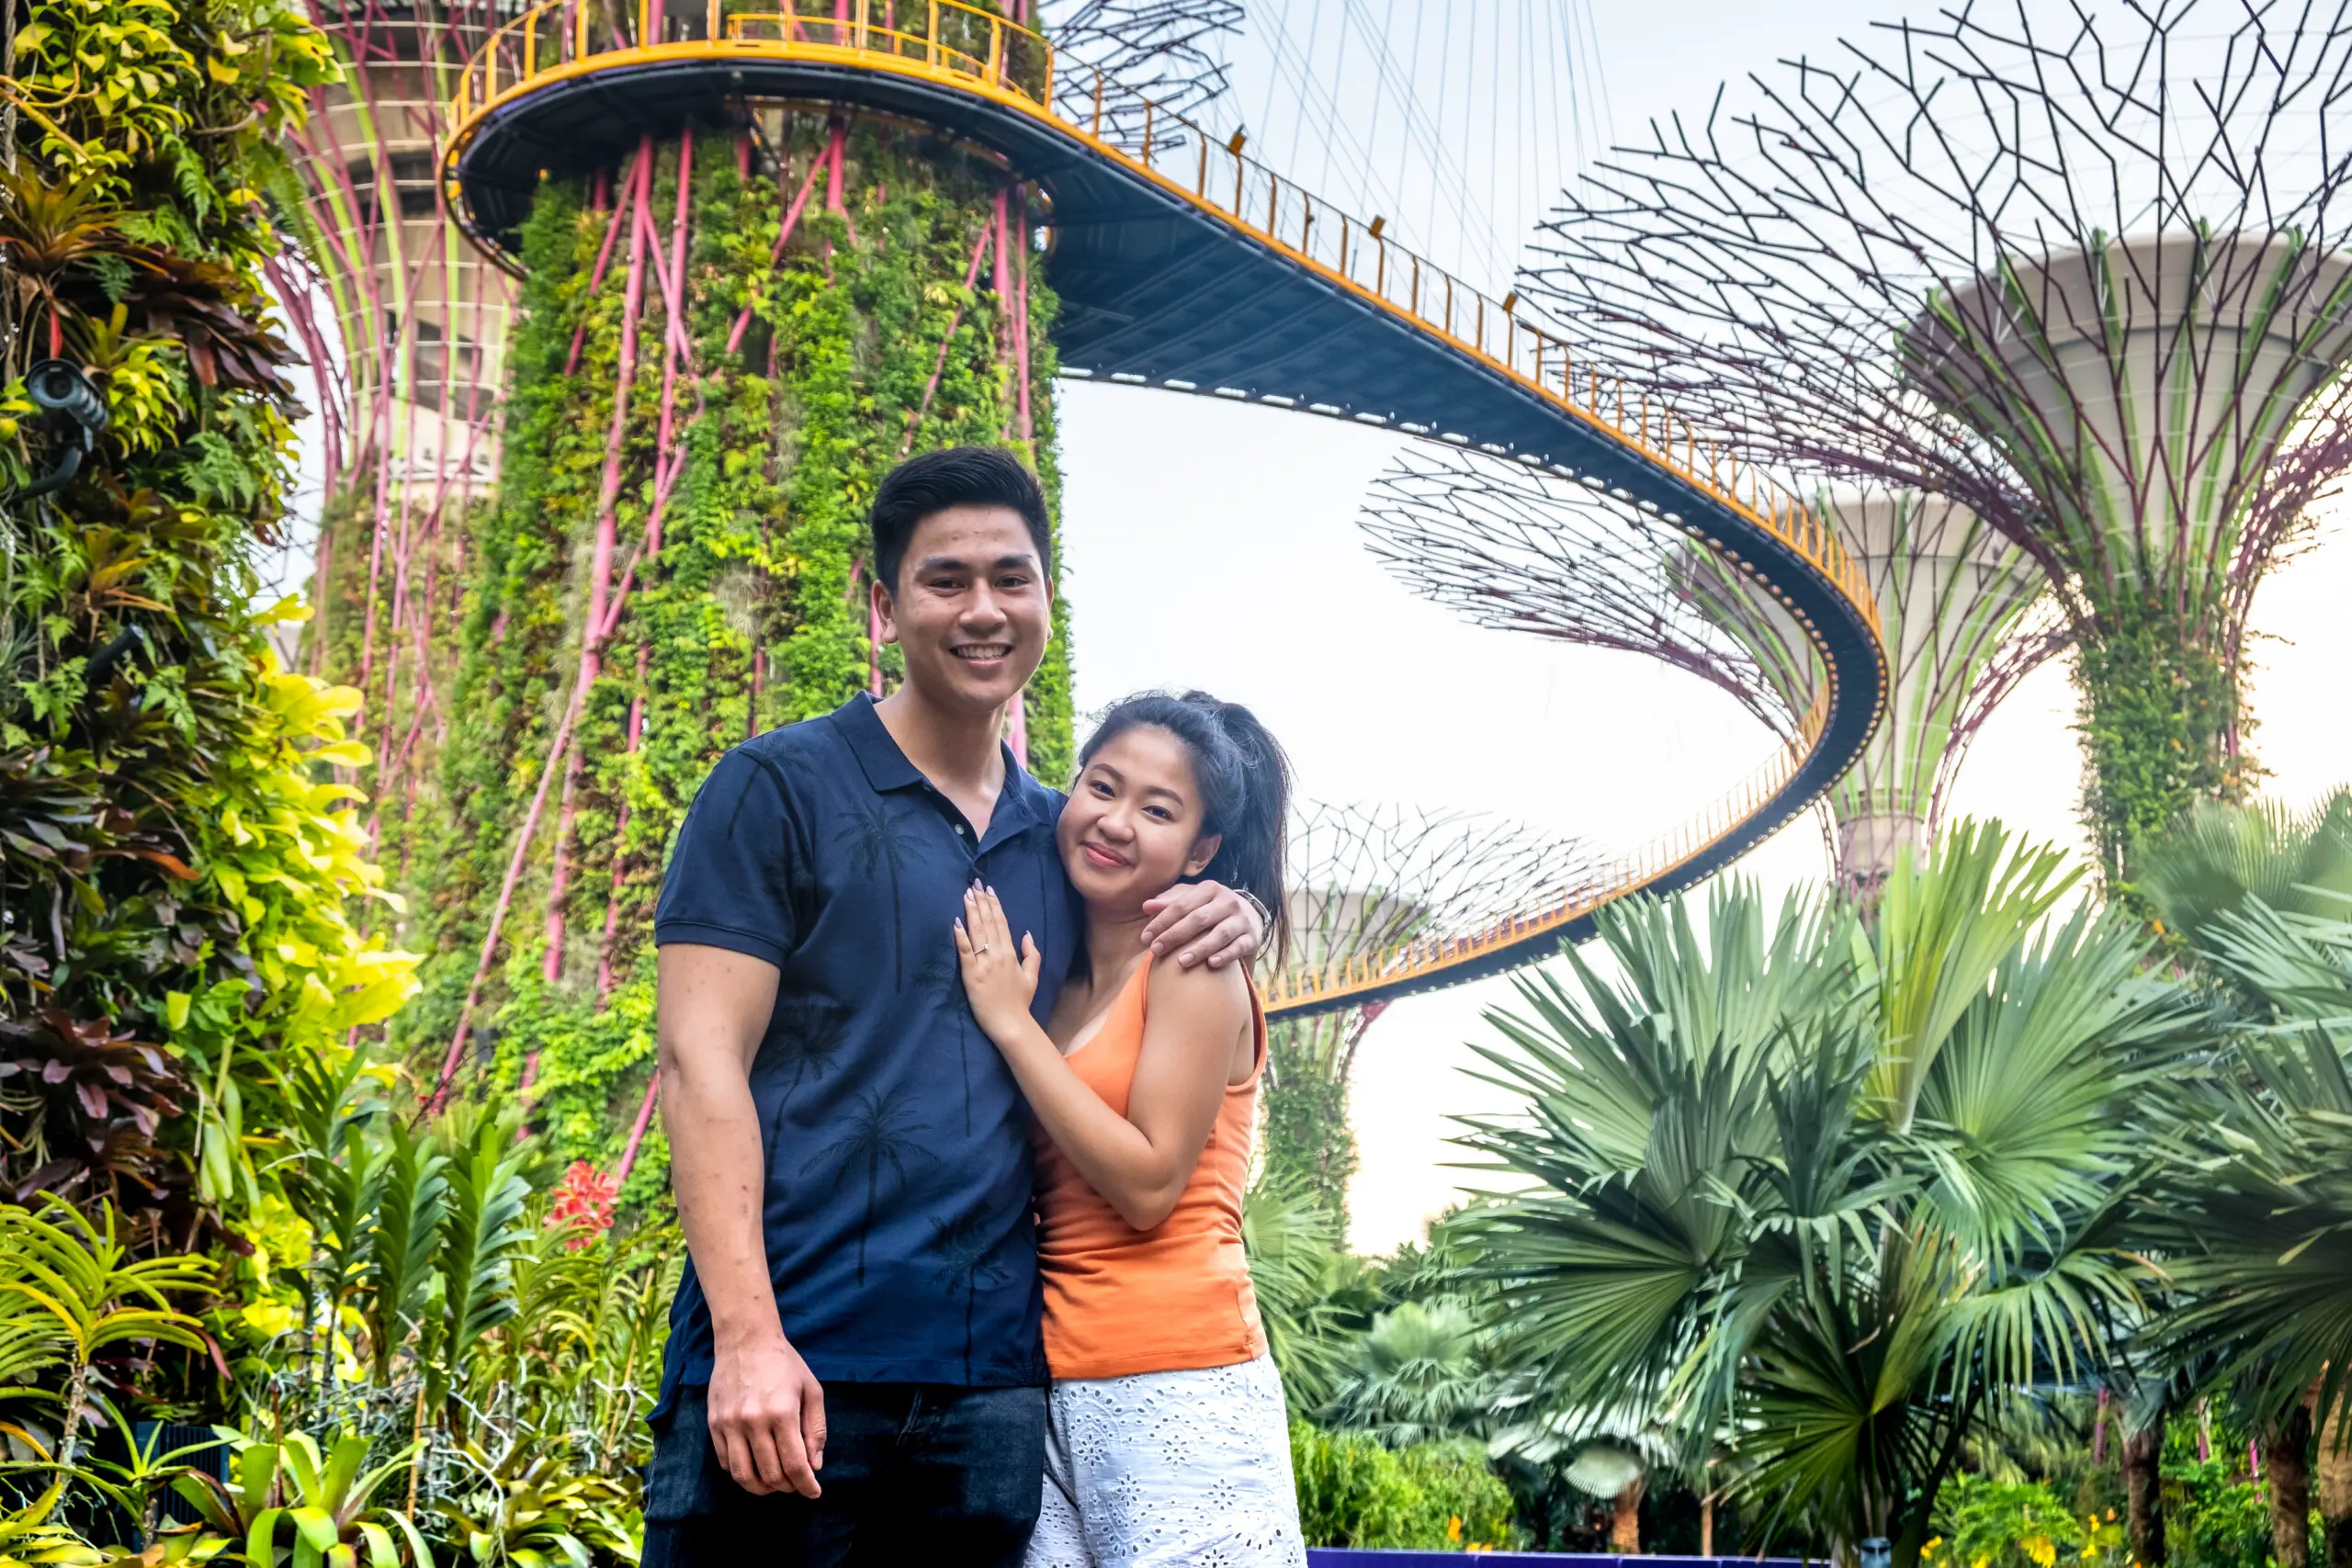 Proposal photoshoot by Ben, Localgrapher in Singapore